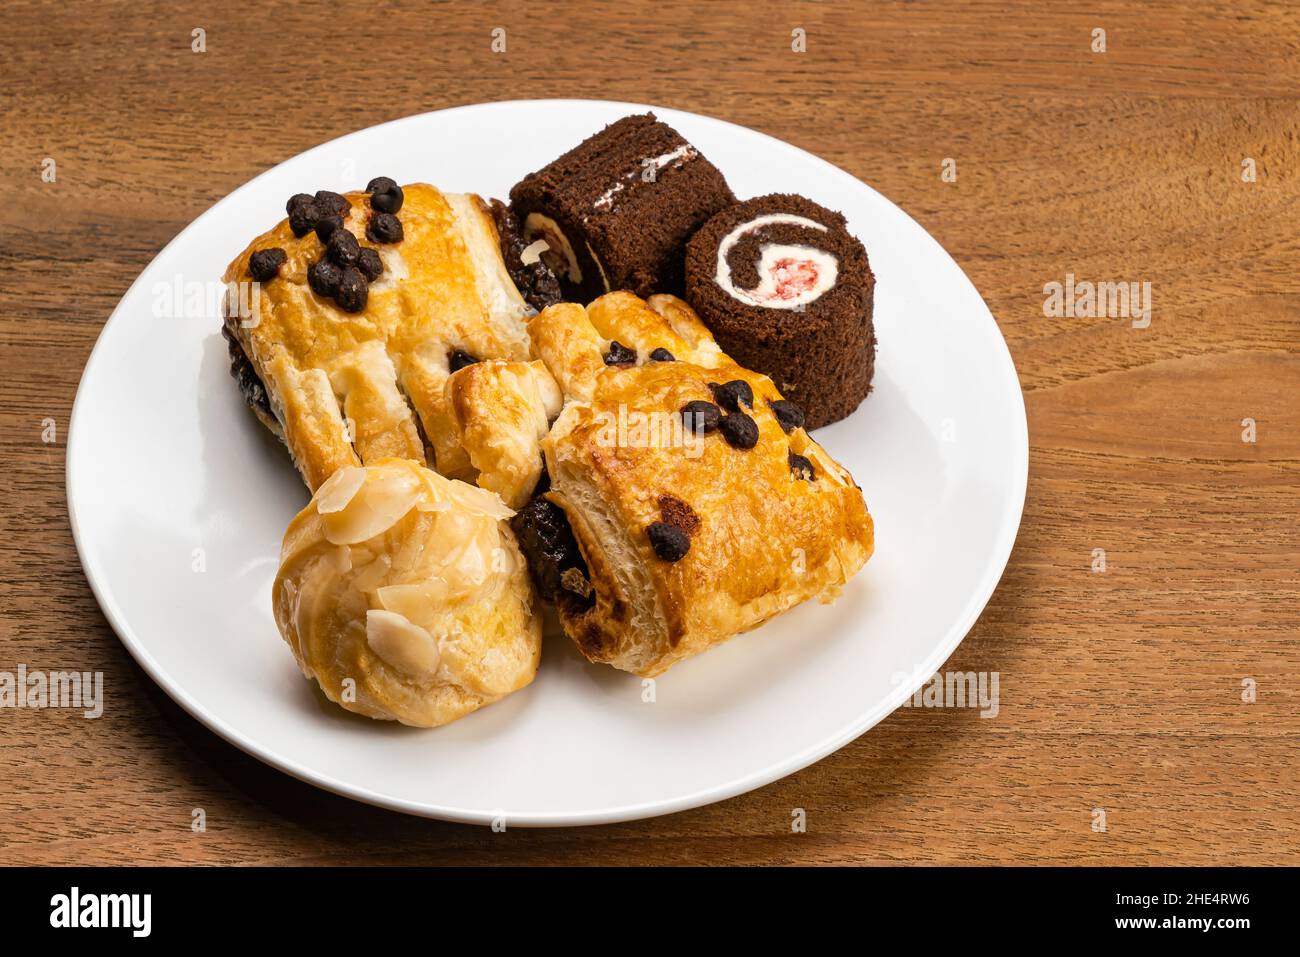 Various baked pastry dessert in white ceramic dish. Assortment of homemade dessert, Eclair filled with sweet corn cream, Danish Pastry filled with cho Stock Photo